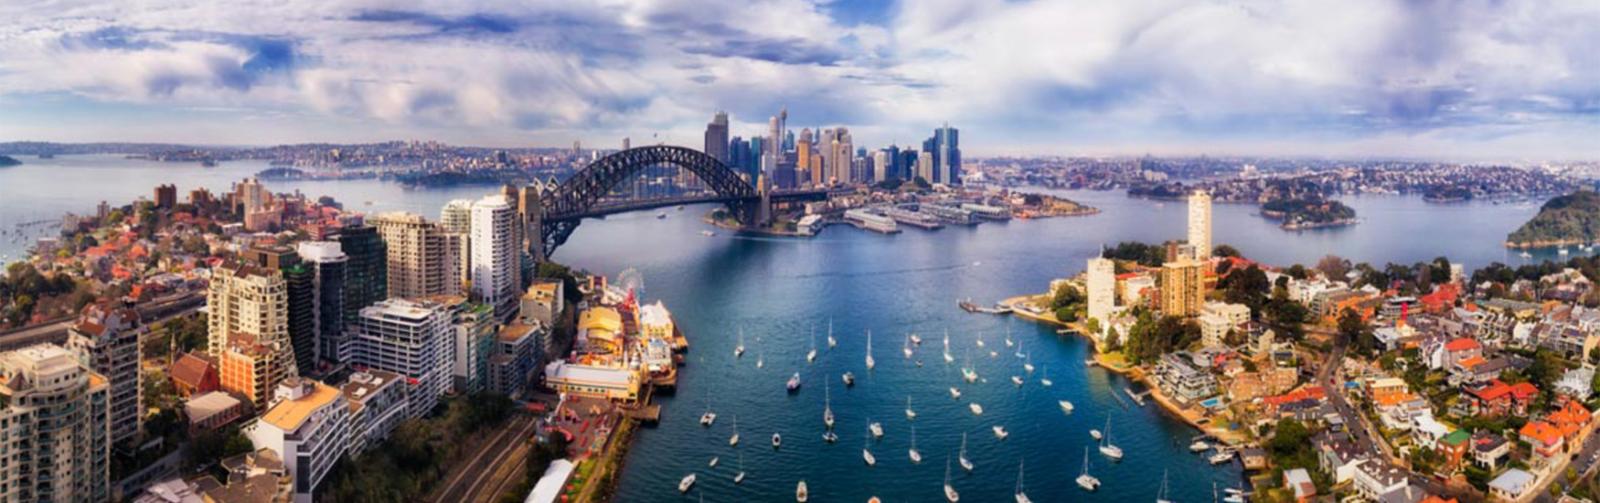 Aerial view of Sydney Harbour